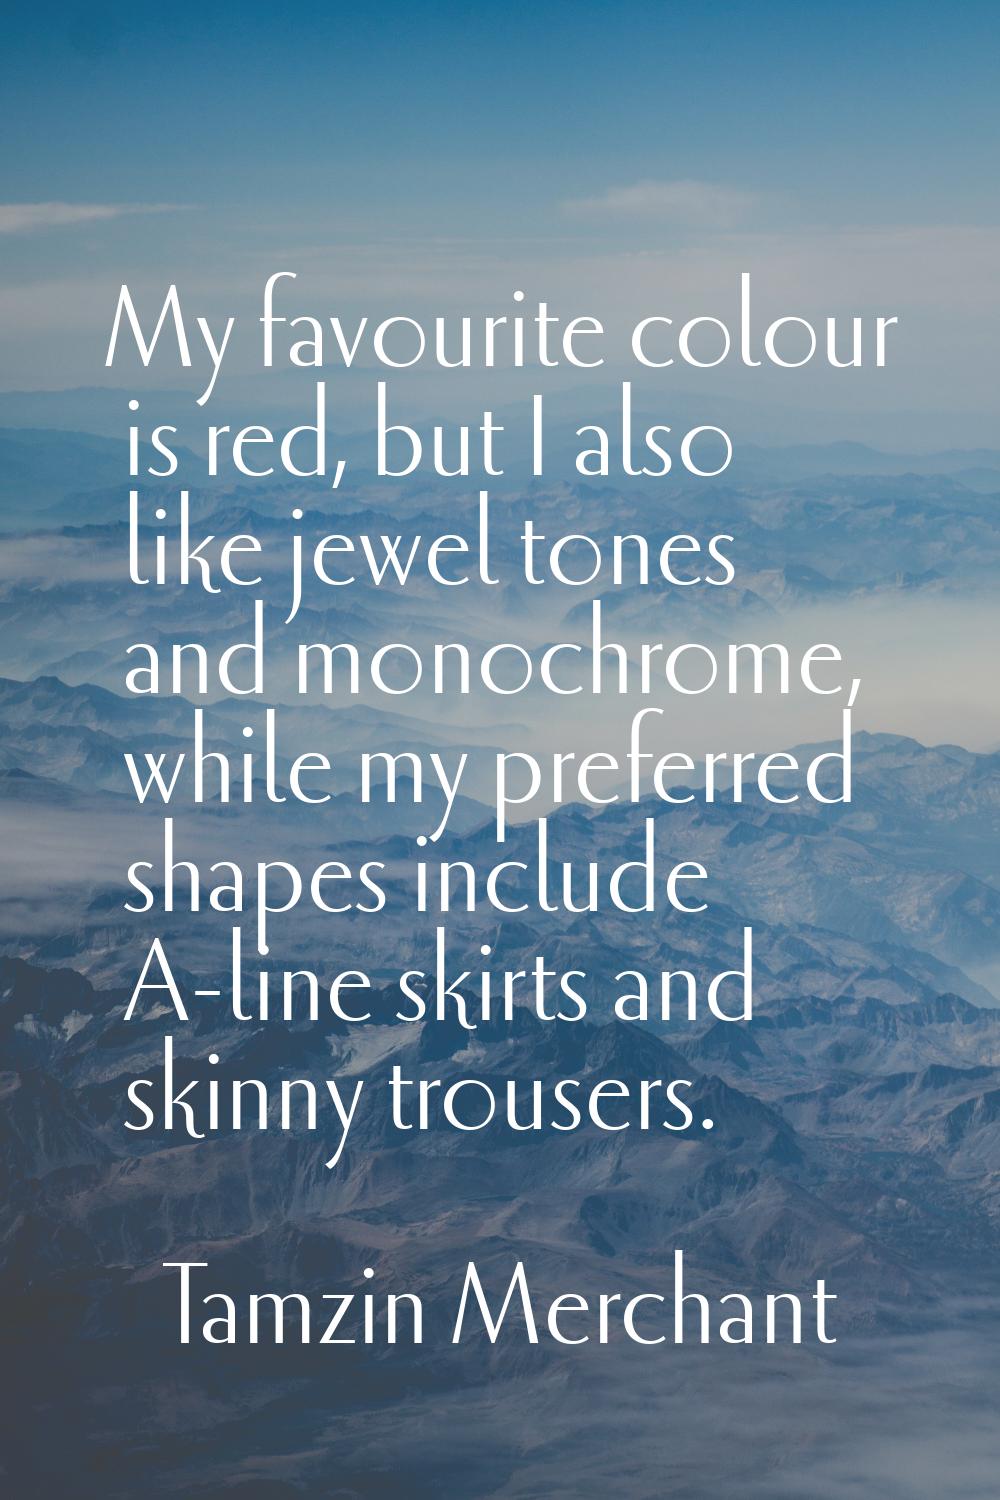 My favourite colour is red, but I also like jewel tones and monochrome, while my preferred shapes i